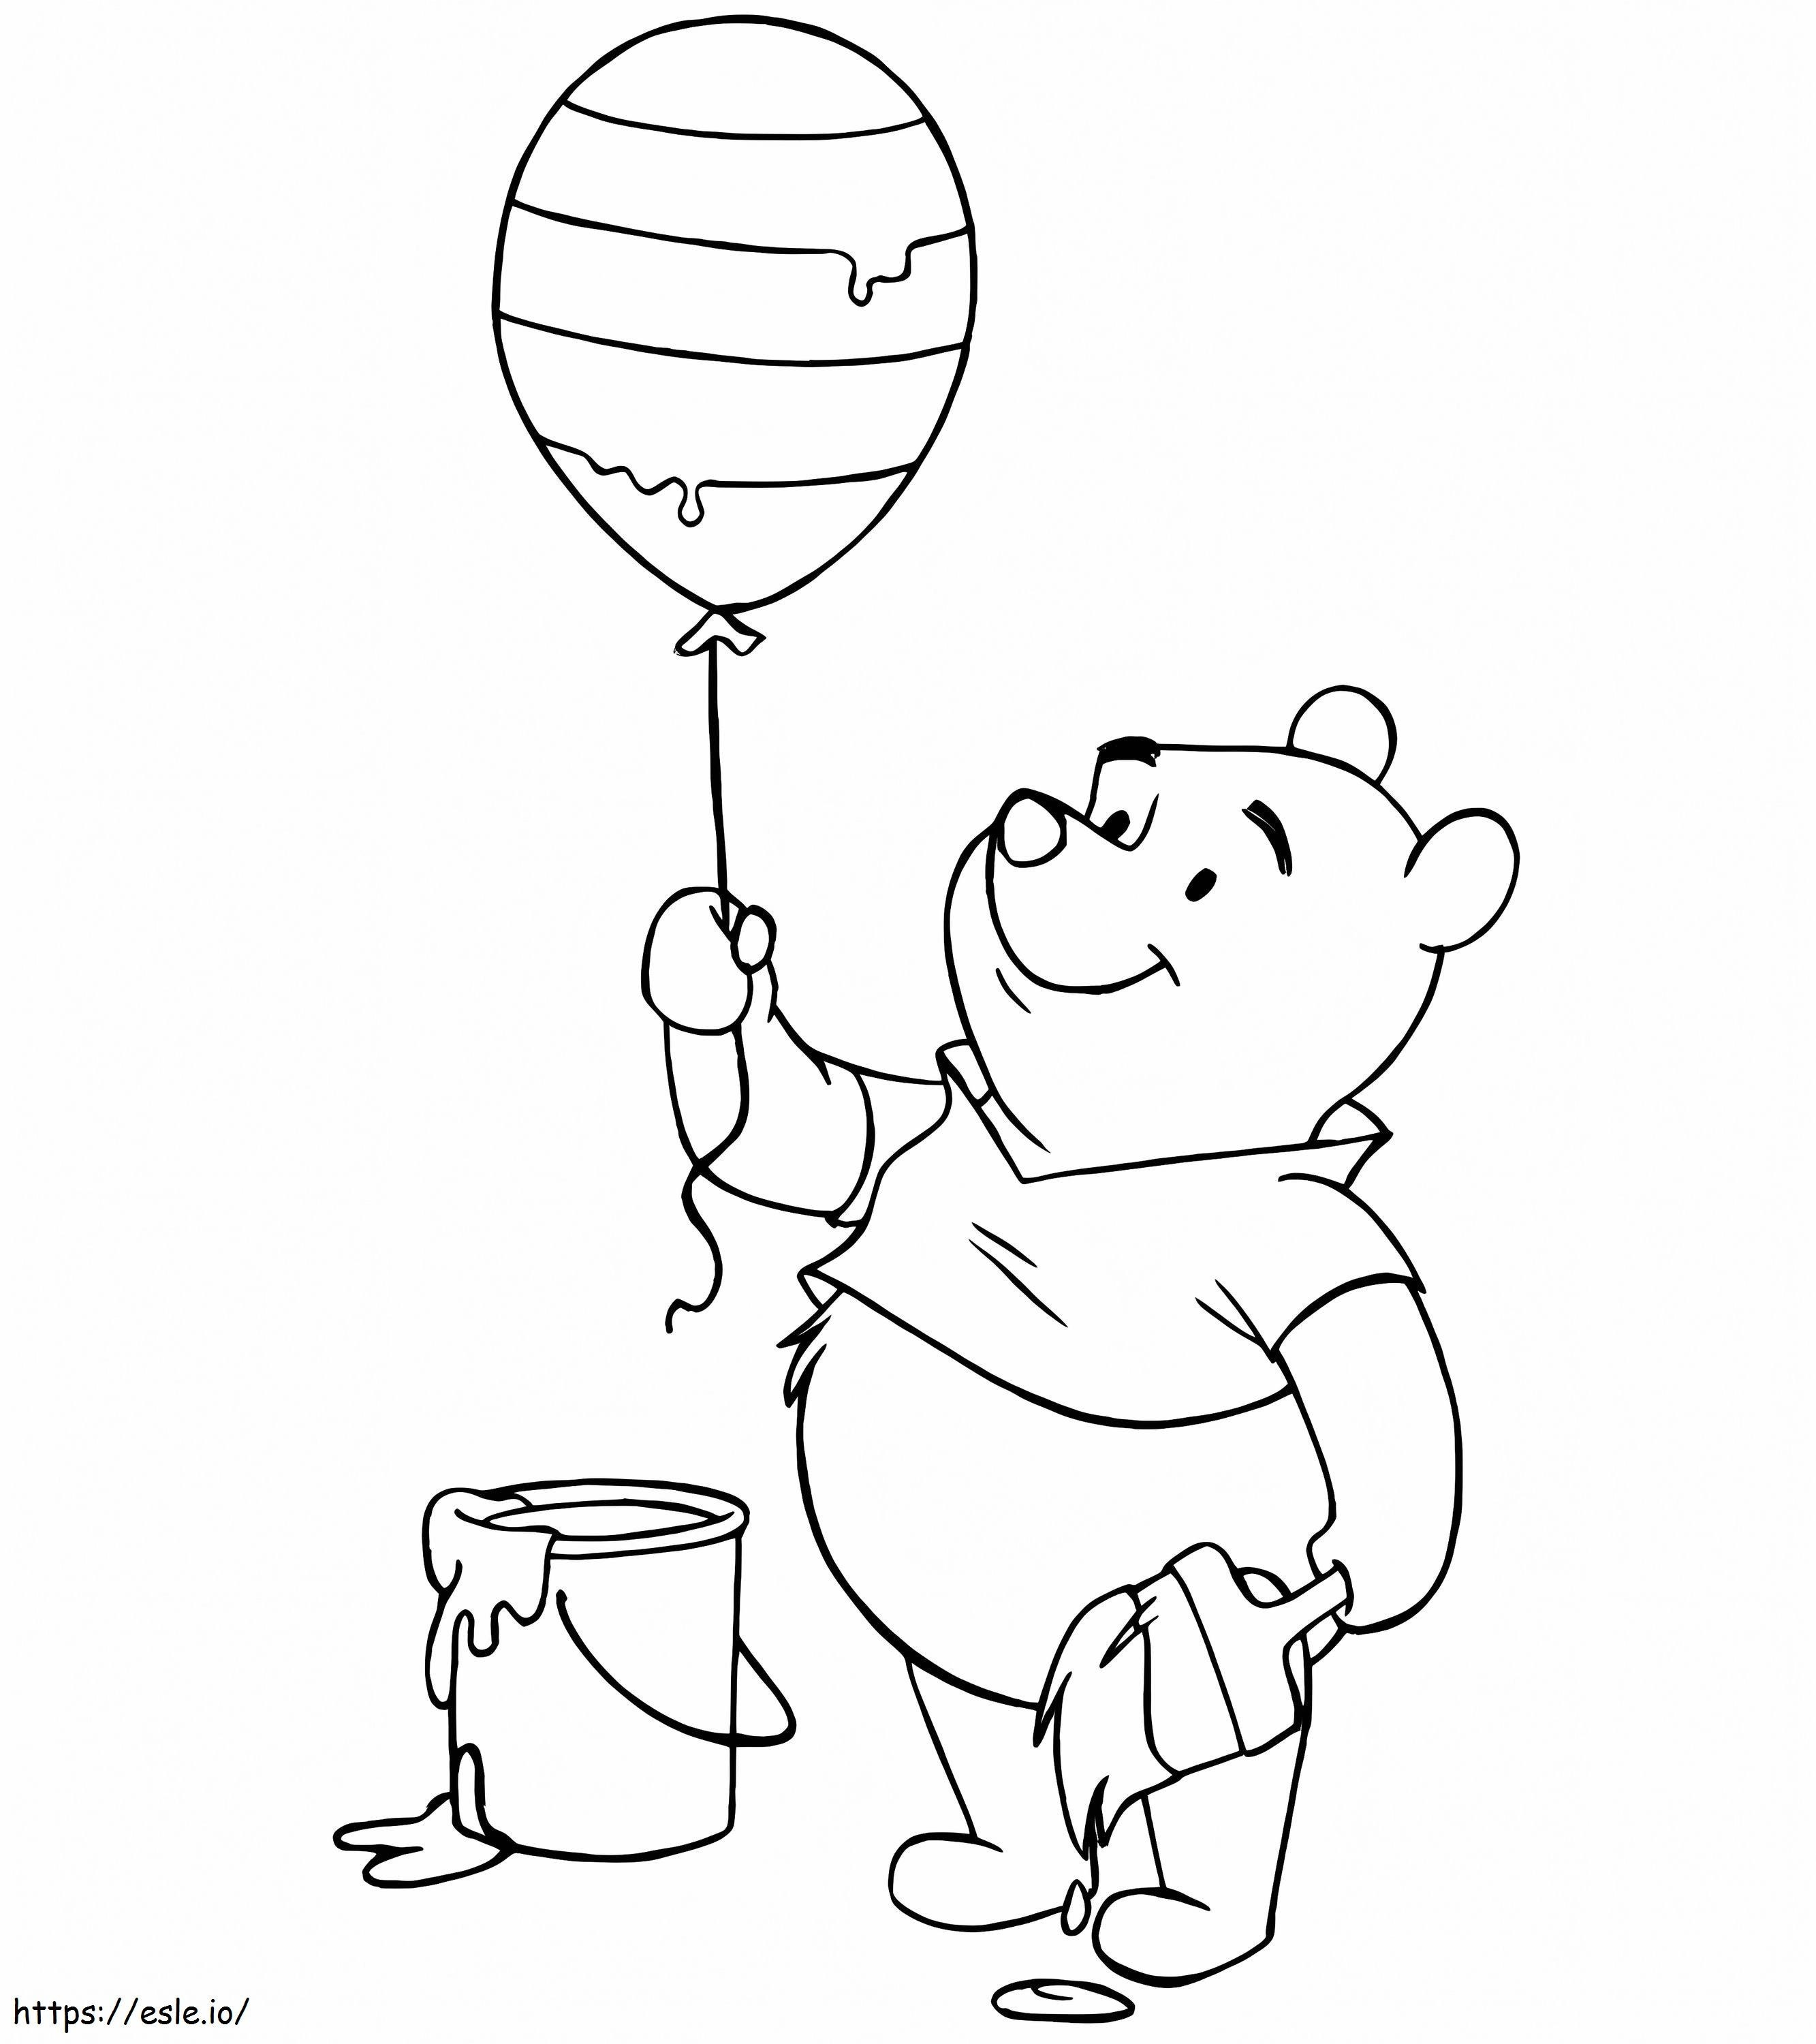 Pooh Bear Holding Balloon coloring page